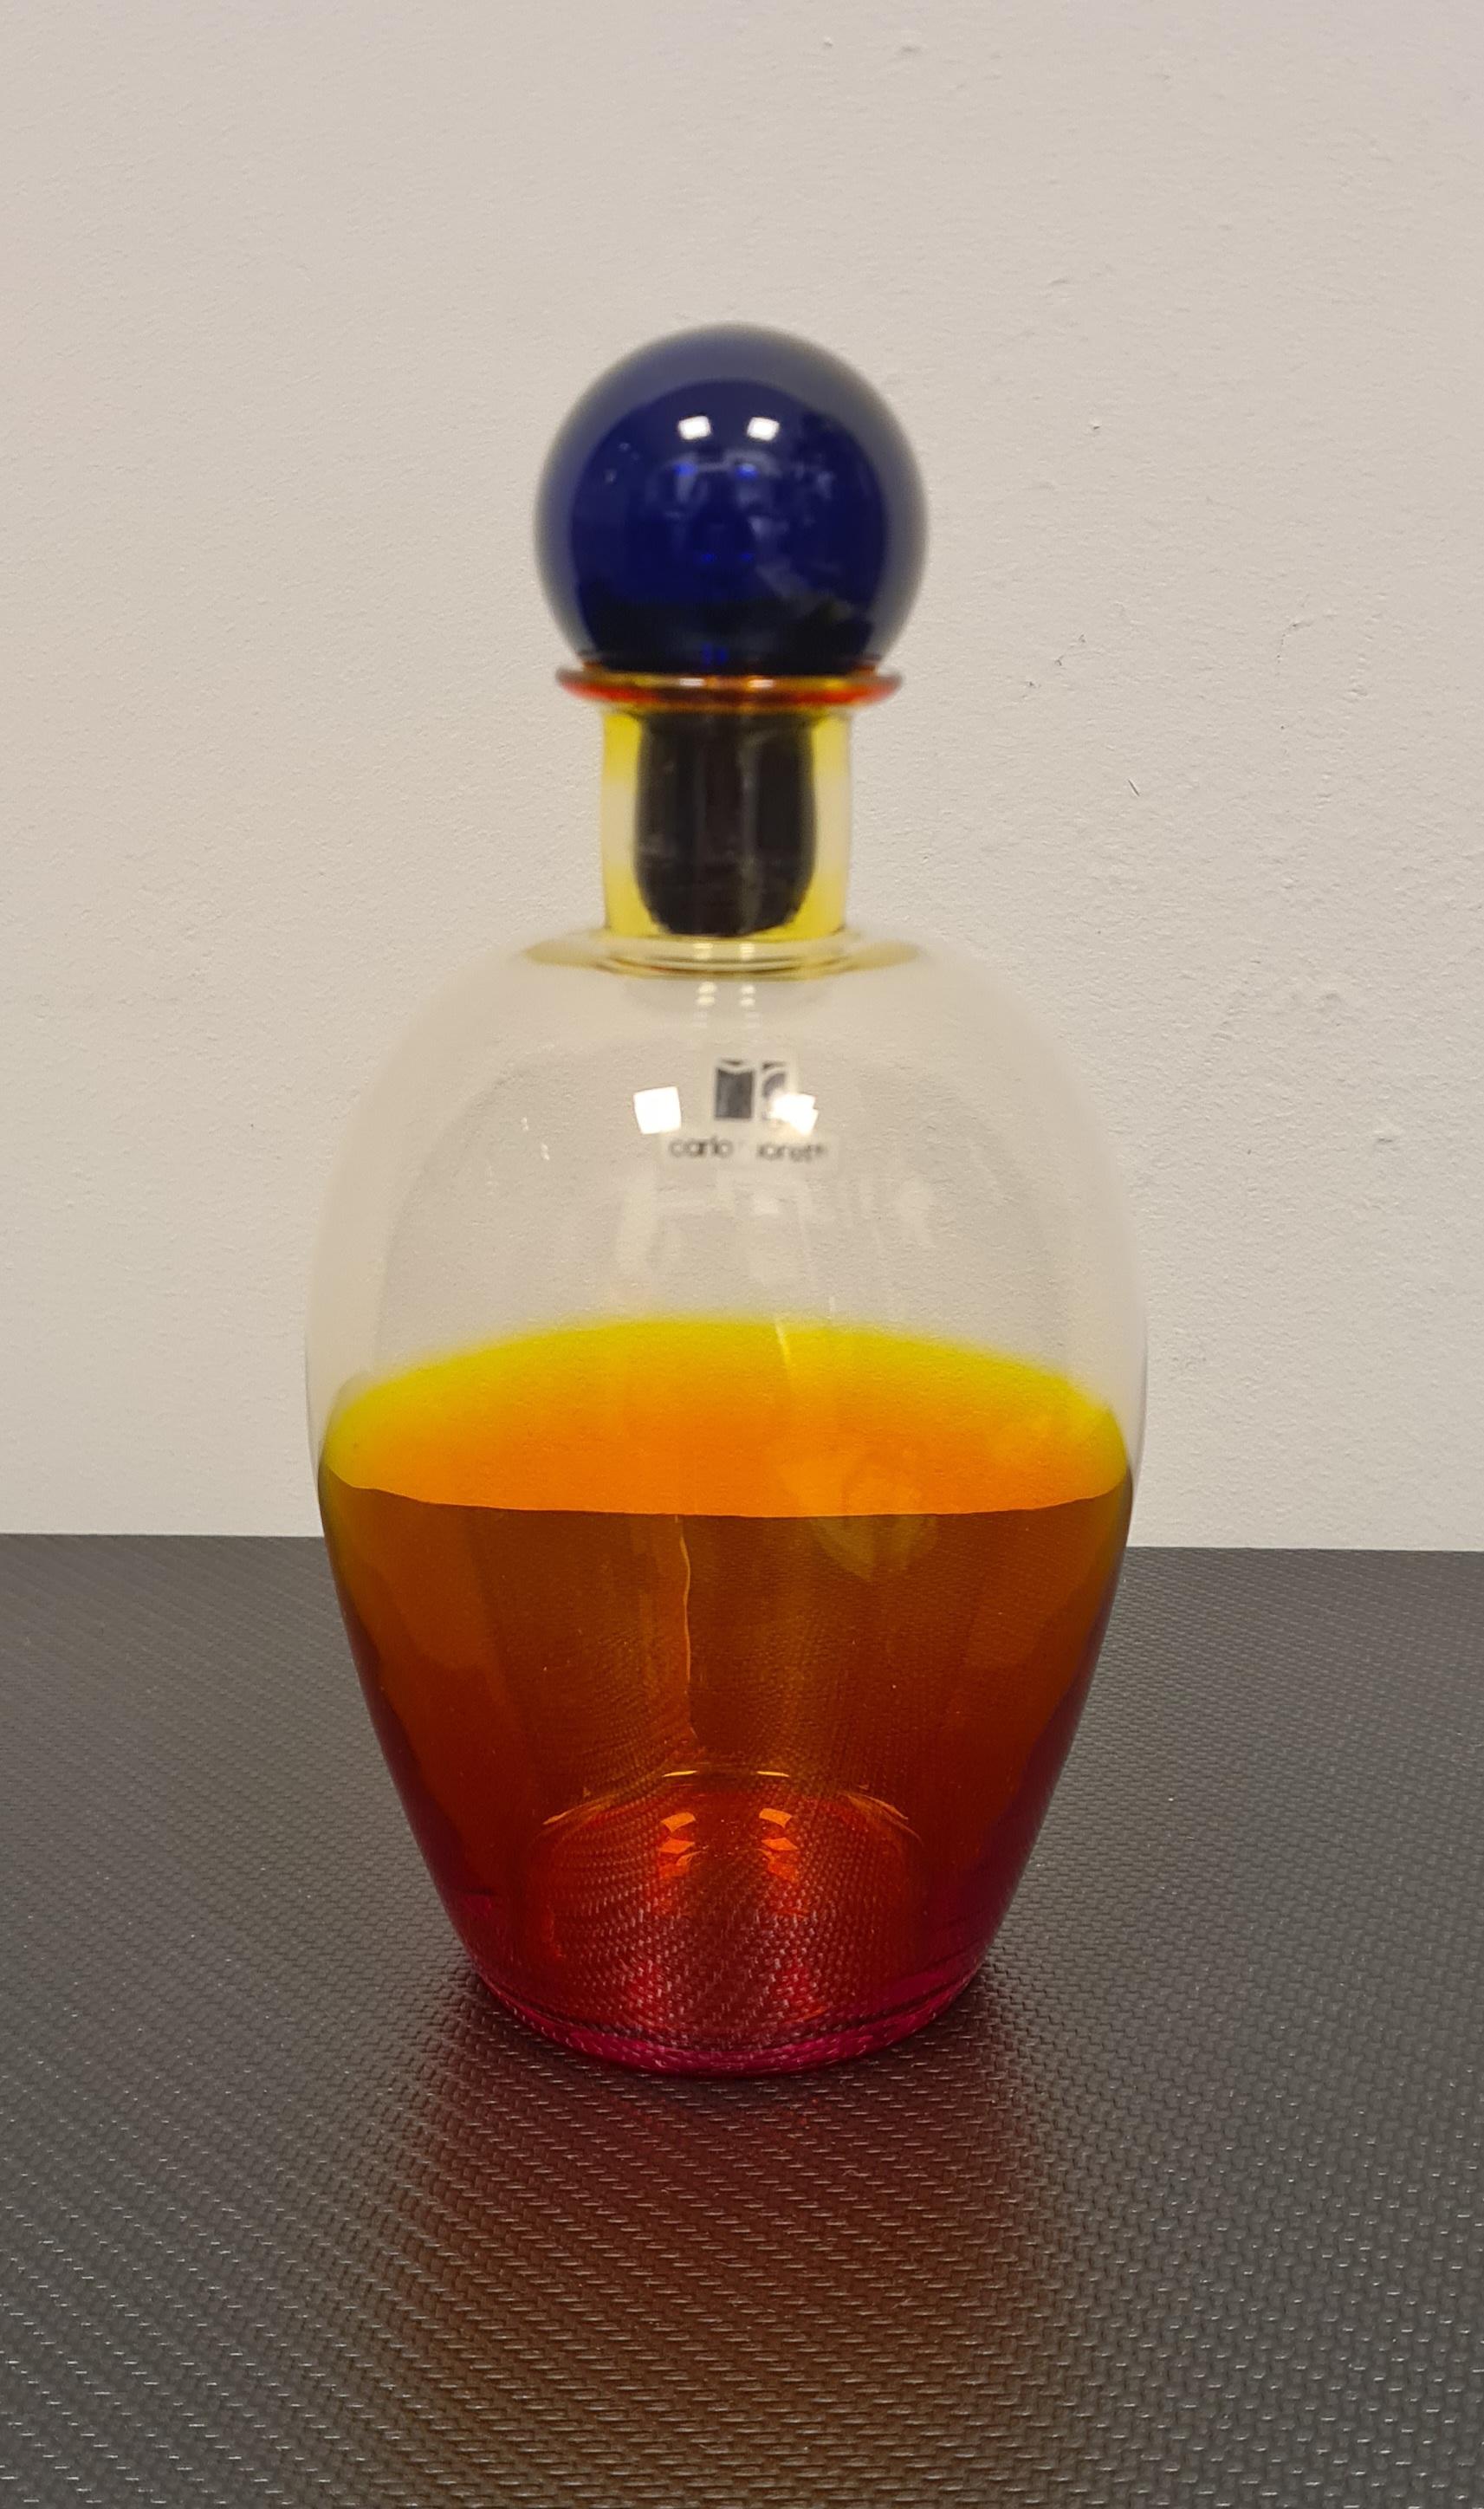 Murano glass bottle by master Carlo Moretti.

Carlo Moretti founded his eponymous glassworks in 1958 in Murano with his brother Giovanni.

Throughout its history Moretti Glassworks has had numerous collaborations including one with a very young